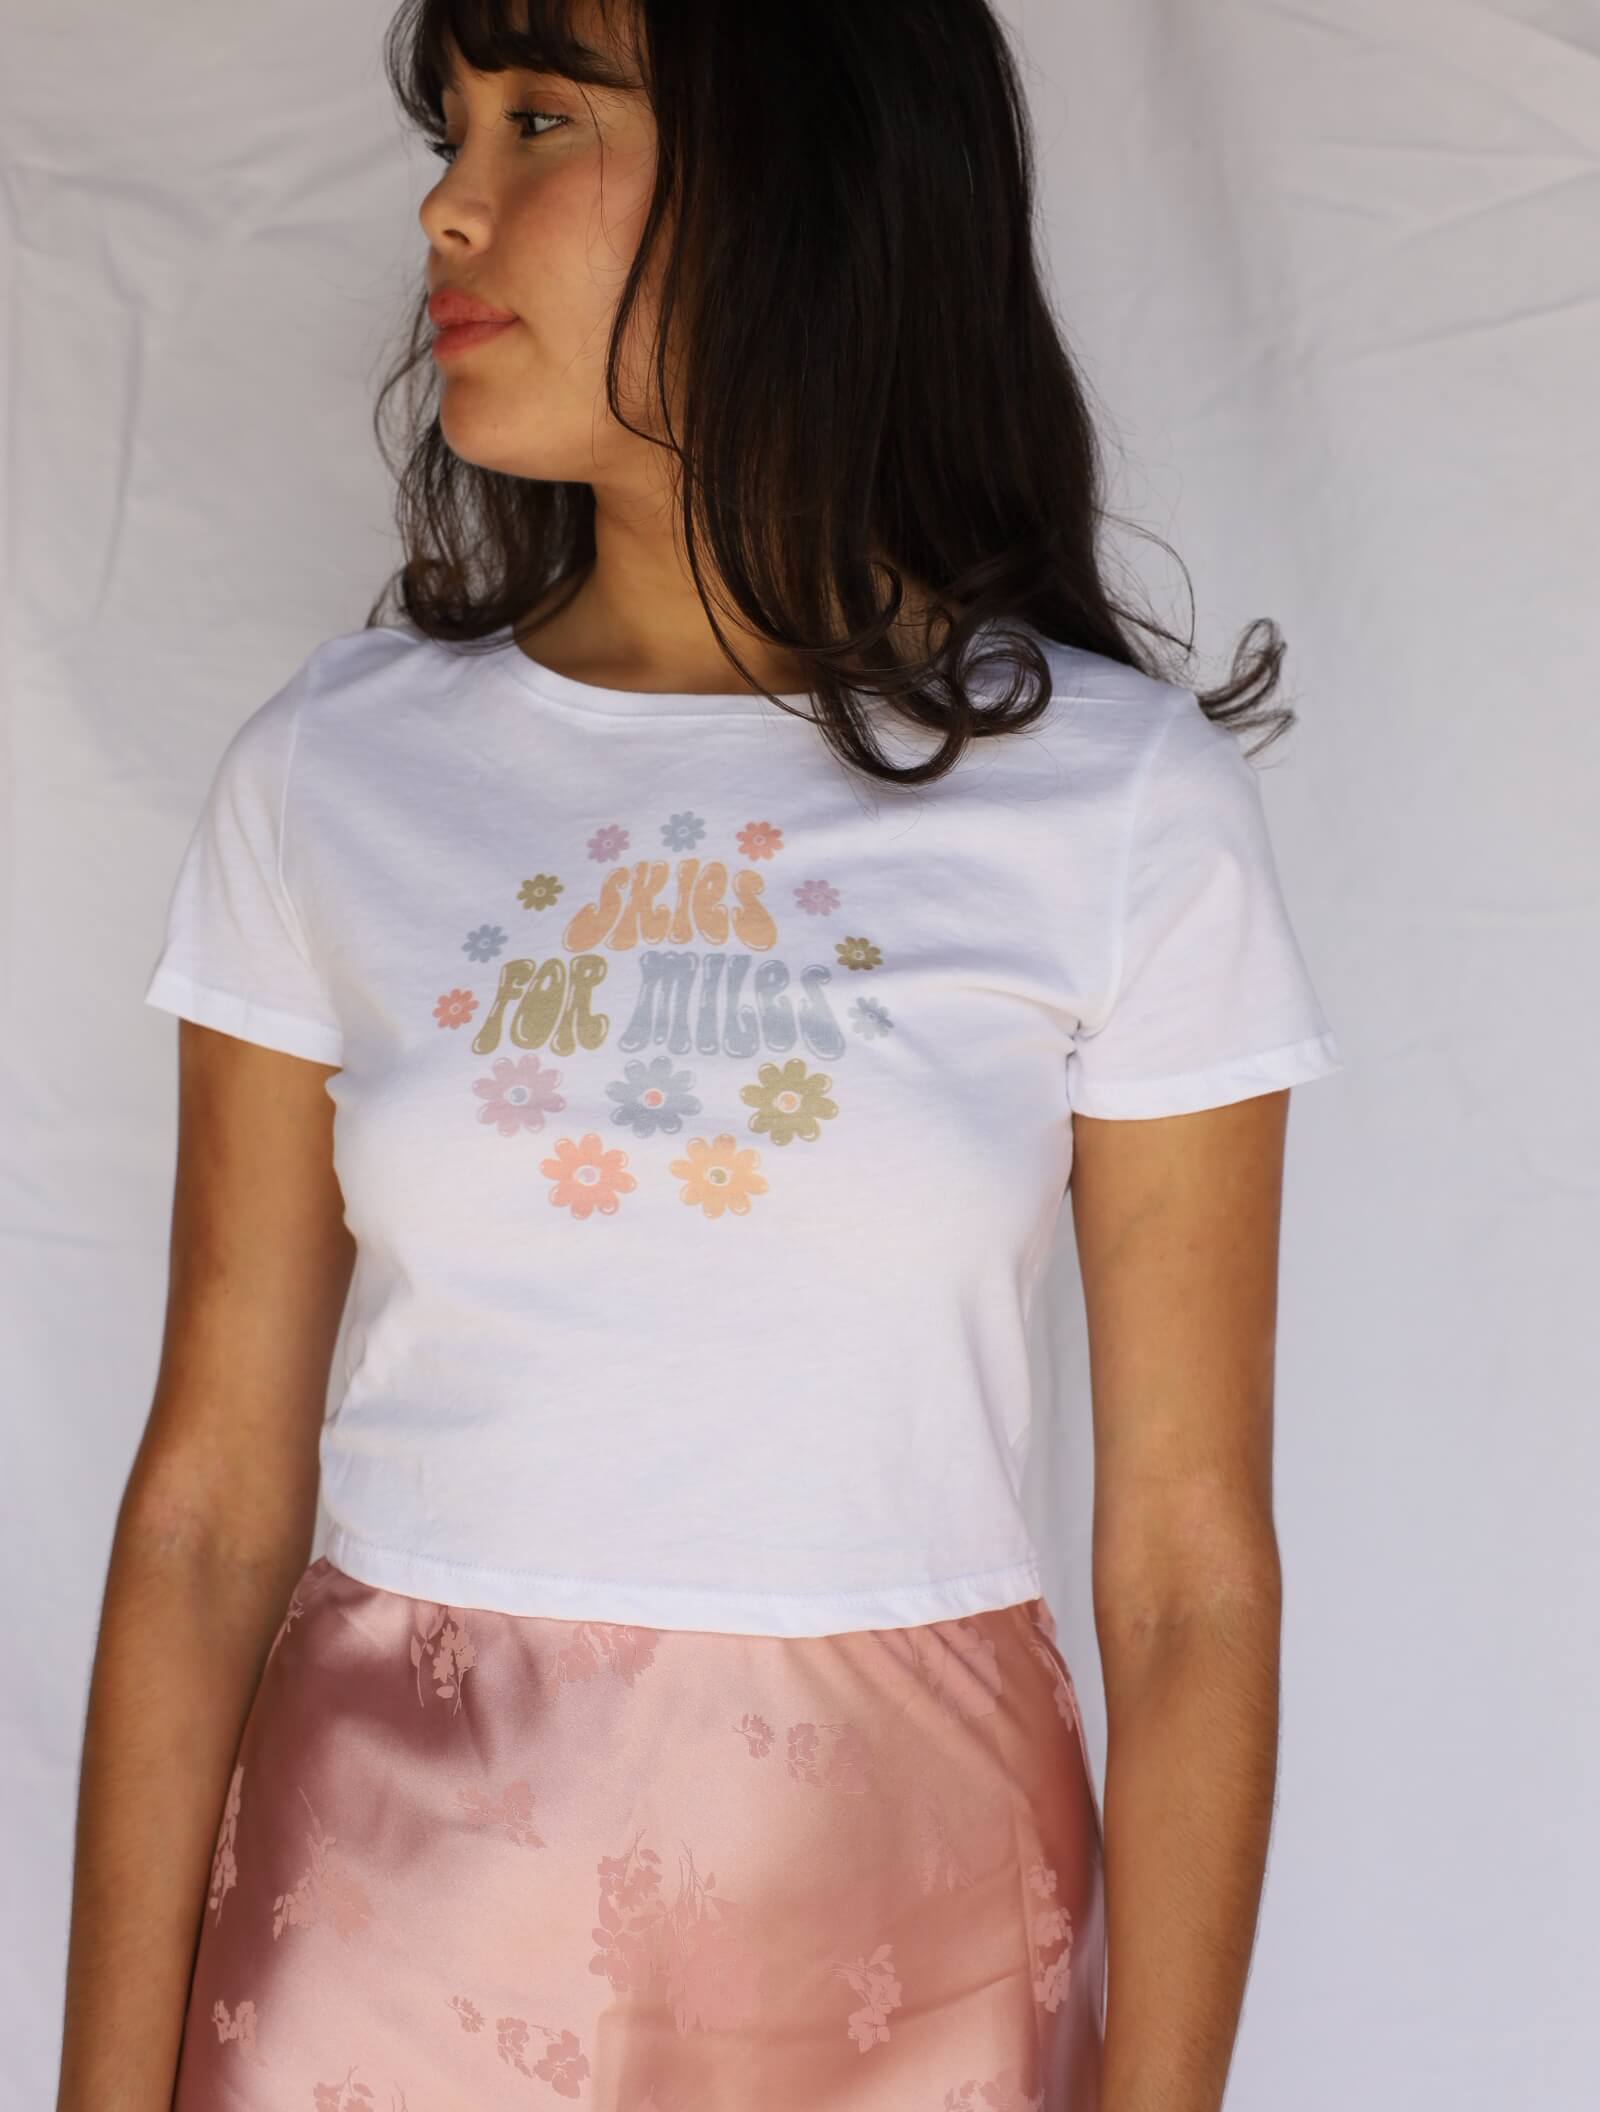 Flower Power Baby Tee - Skies For Miles Boutique